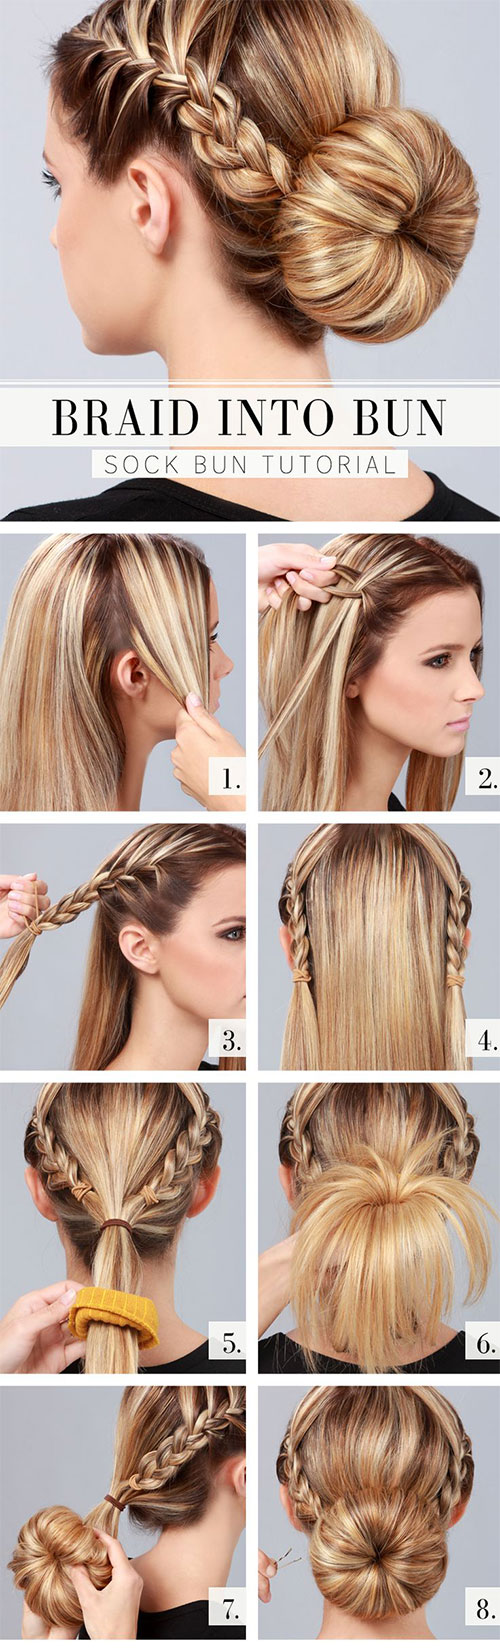 20-Easy-Step-By-Step-Summer-Braids-Style-Tutorials-For-Beginners-2015-6